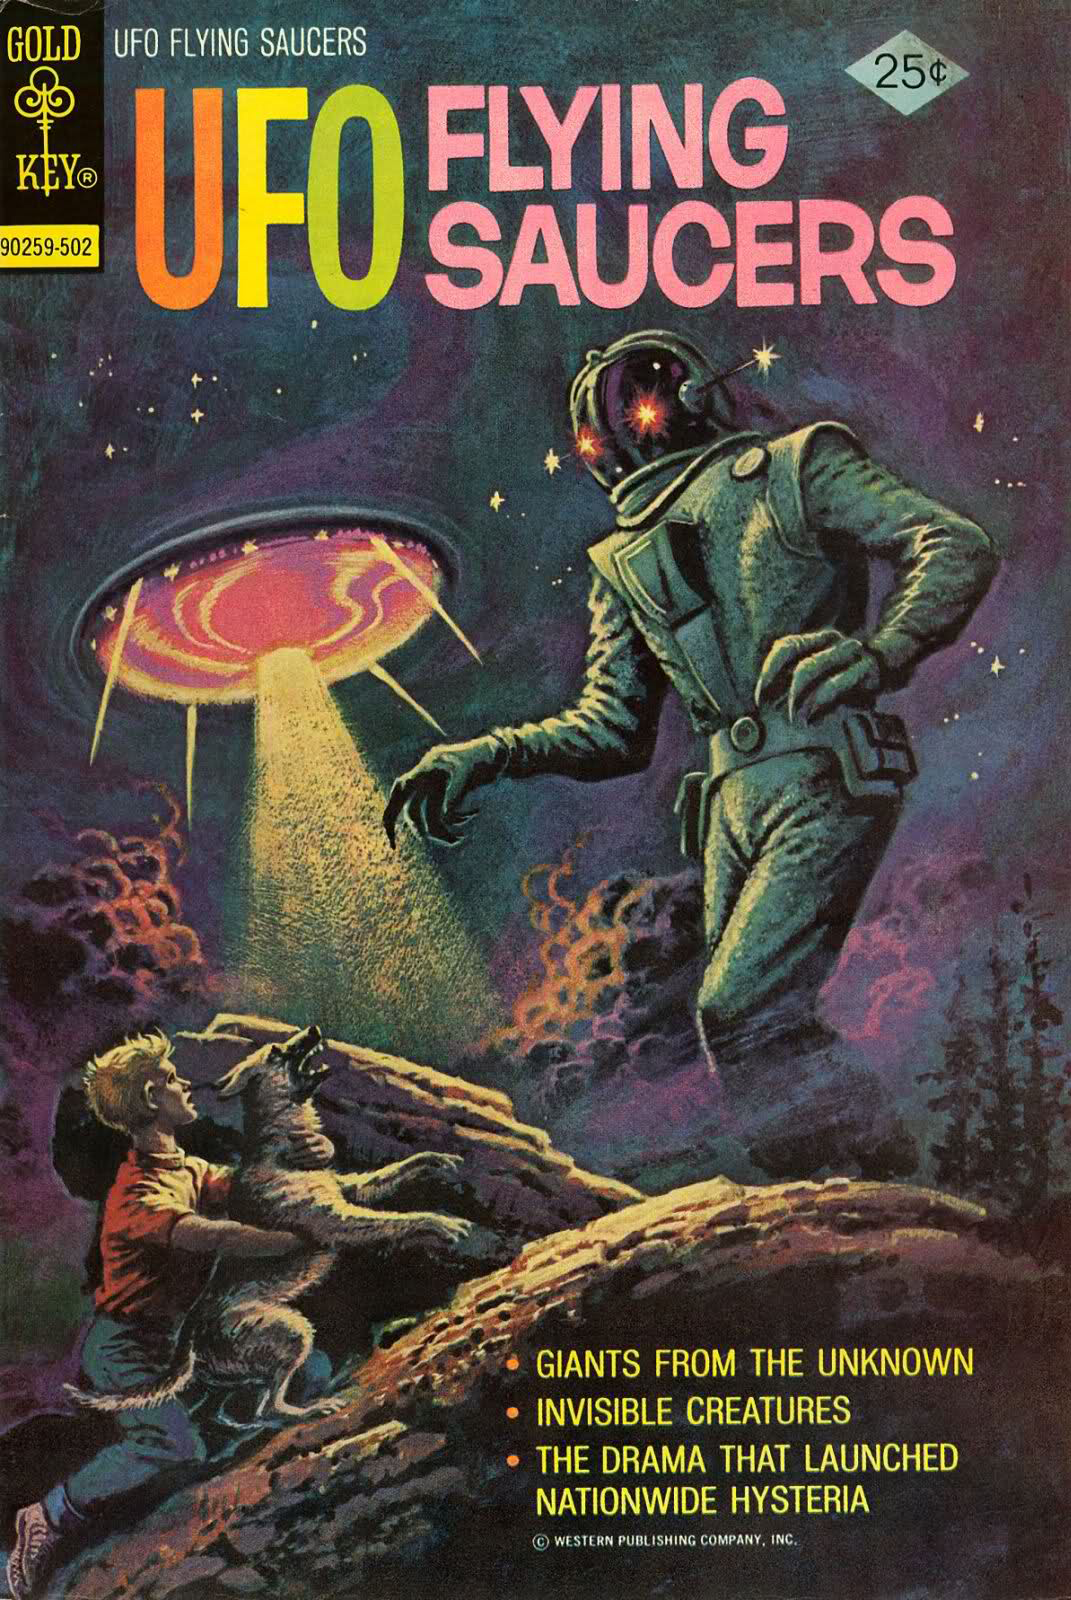 UFO Flying Saucers #5 (Gold Key, 1975)